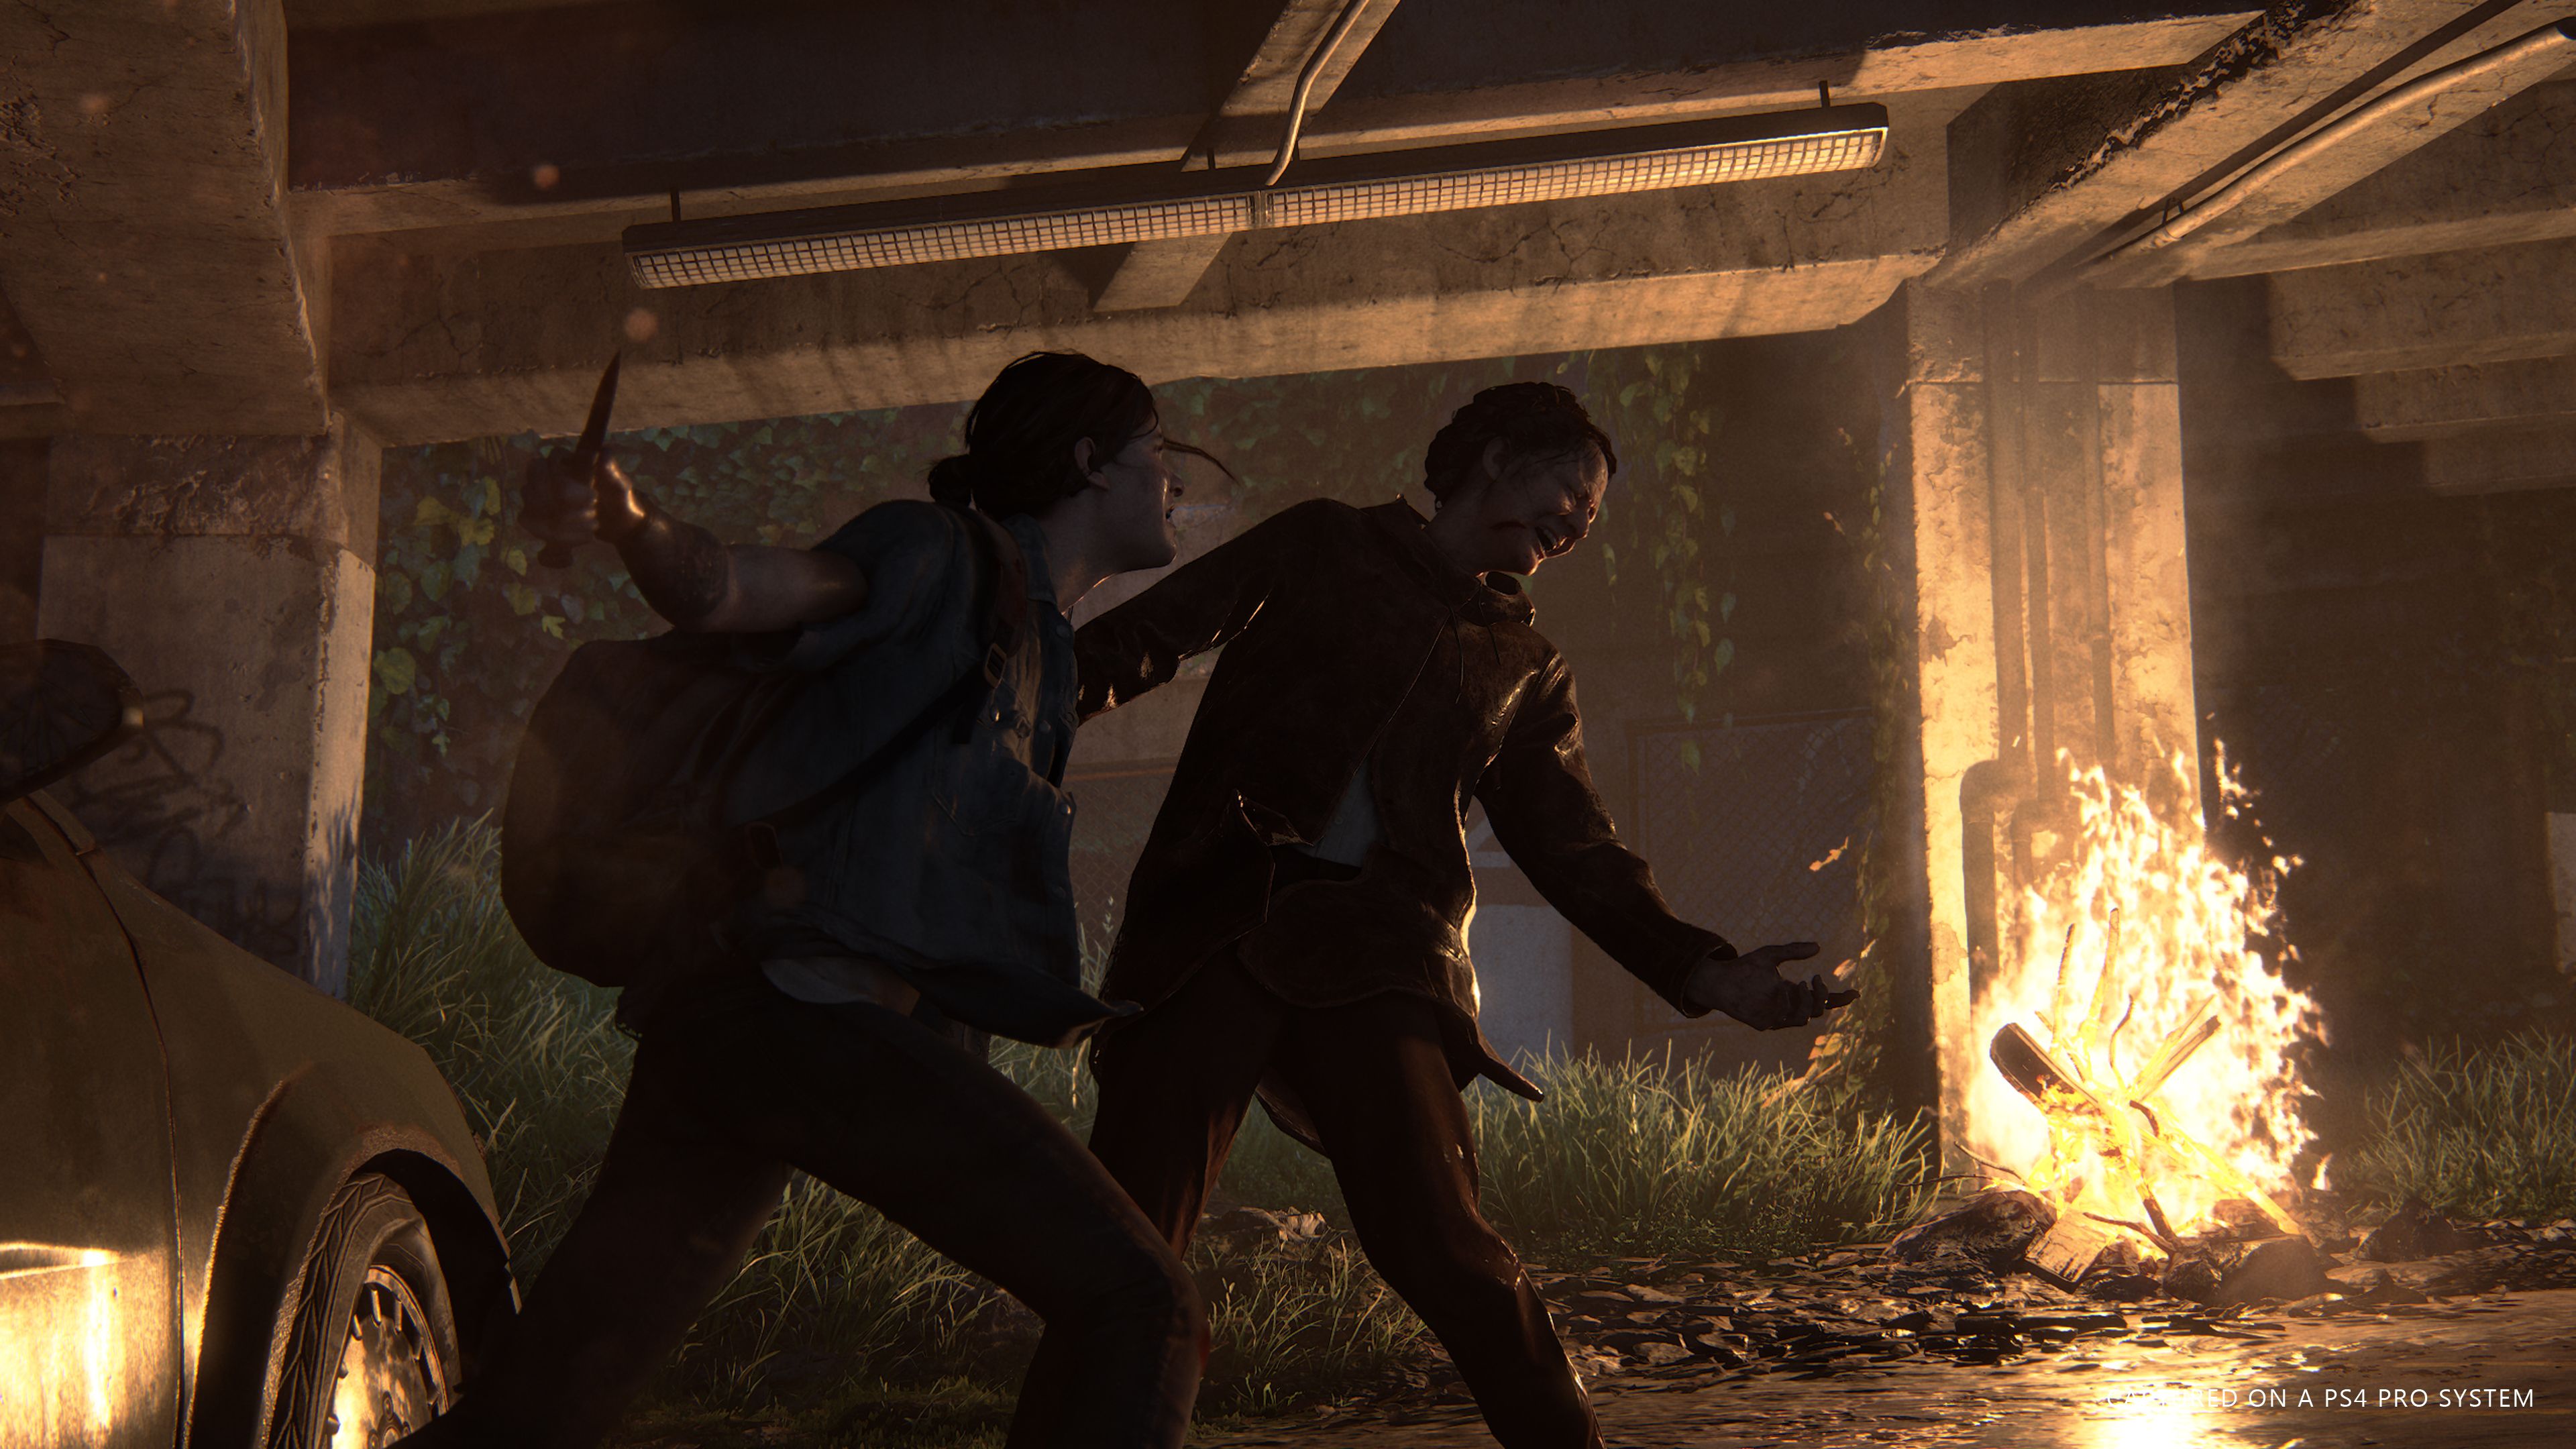 The Last Of Us new game officially cancelled by Naughty Dog